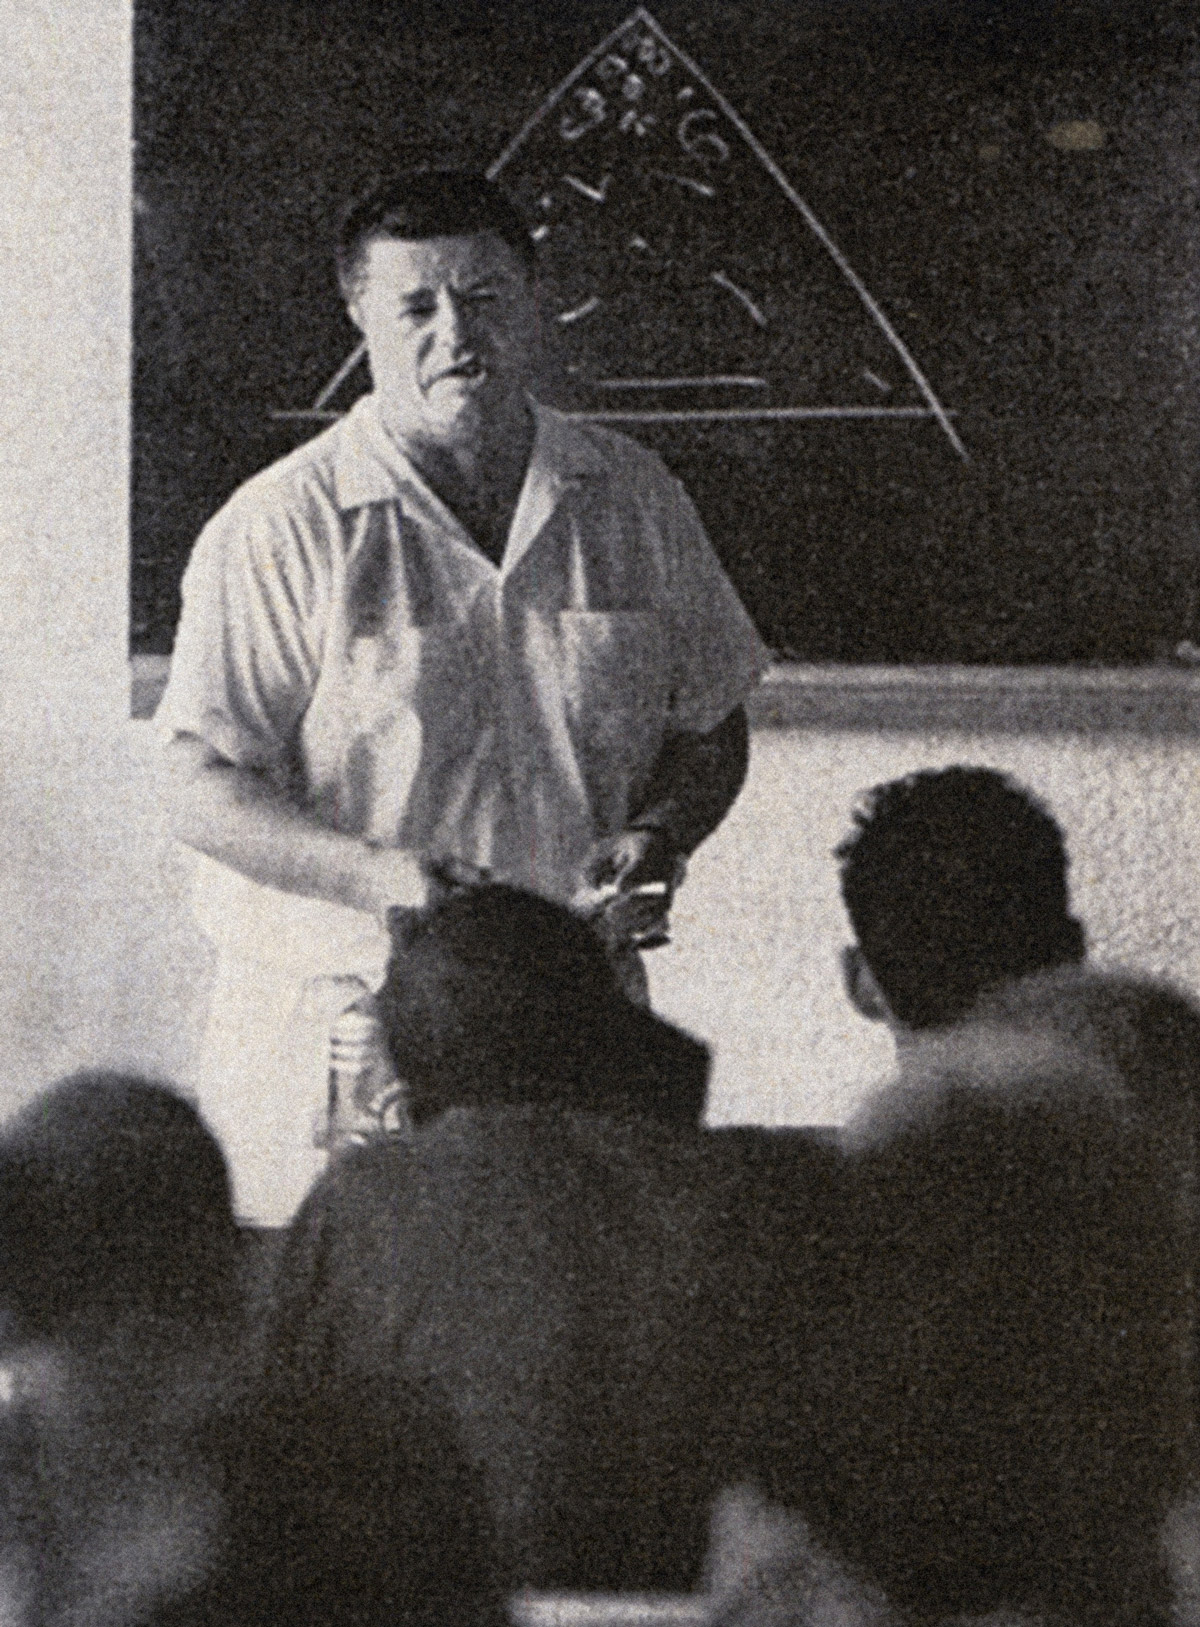 A nineteen sixty-two photograph of Chuck Dederich lecturing at a Synanon meeting.